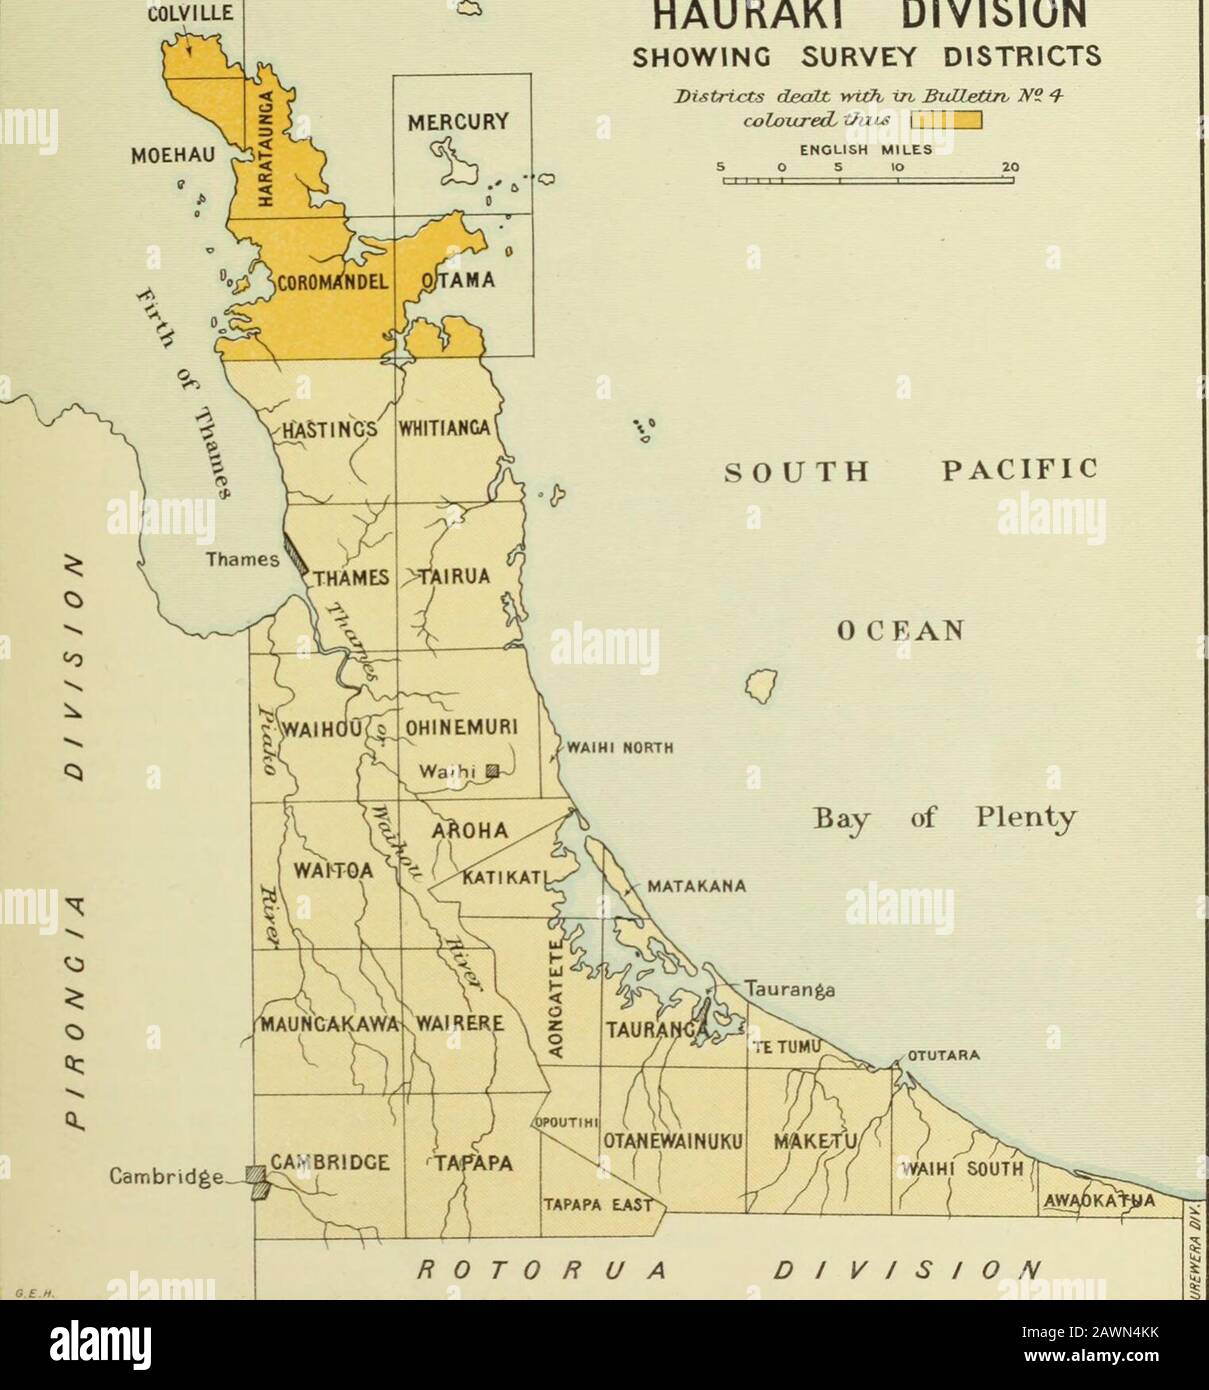 The geology of the Coromandel subdivision, Hauraki, Auckland . PLAN OF HAURAK! DIVISION SHOWING SURVEY DISTRICTS Districts dealt vyitTi in. BuUettrv NZ 4-coloiweci tfuis ENGLISH MILES SOUTH PACIFIC 0 CEAN. Bay of Plenty ^CAMBRIDGECambridge—Hfj R 0 T 0 Ft U A D I V J S I O N By Authority : John Uackay, Government Printer. BULLETIN No. 4 (NEW SERIES) THE GEOLOGY OF THE COKOMANDEL SUBDIVISION, HAURAKI. AUCKLAND. CHAPTER I. GENERAL INFORMATION. Introduction . .. .. 1 Fauna Area described in this Bulletin .. .. 2 Flora .. Officers connected with Field-work .. %2 Climate Acknowledgments .. ..3 Scen Stock Photo